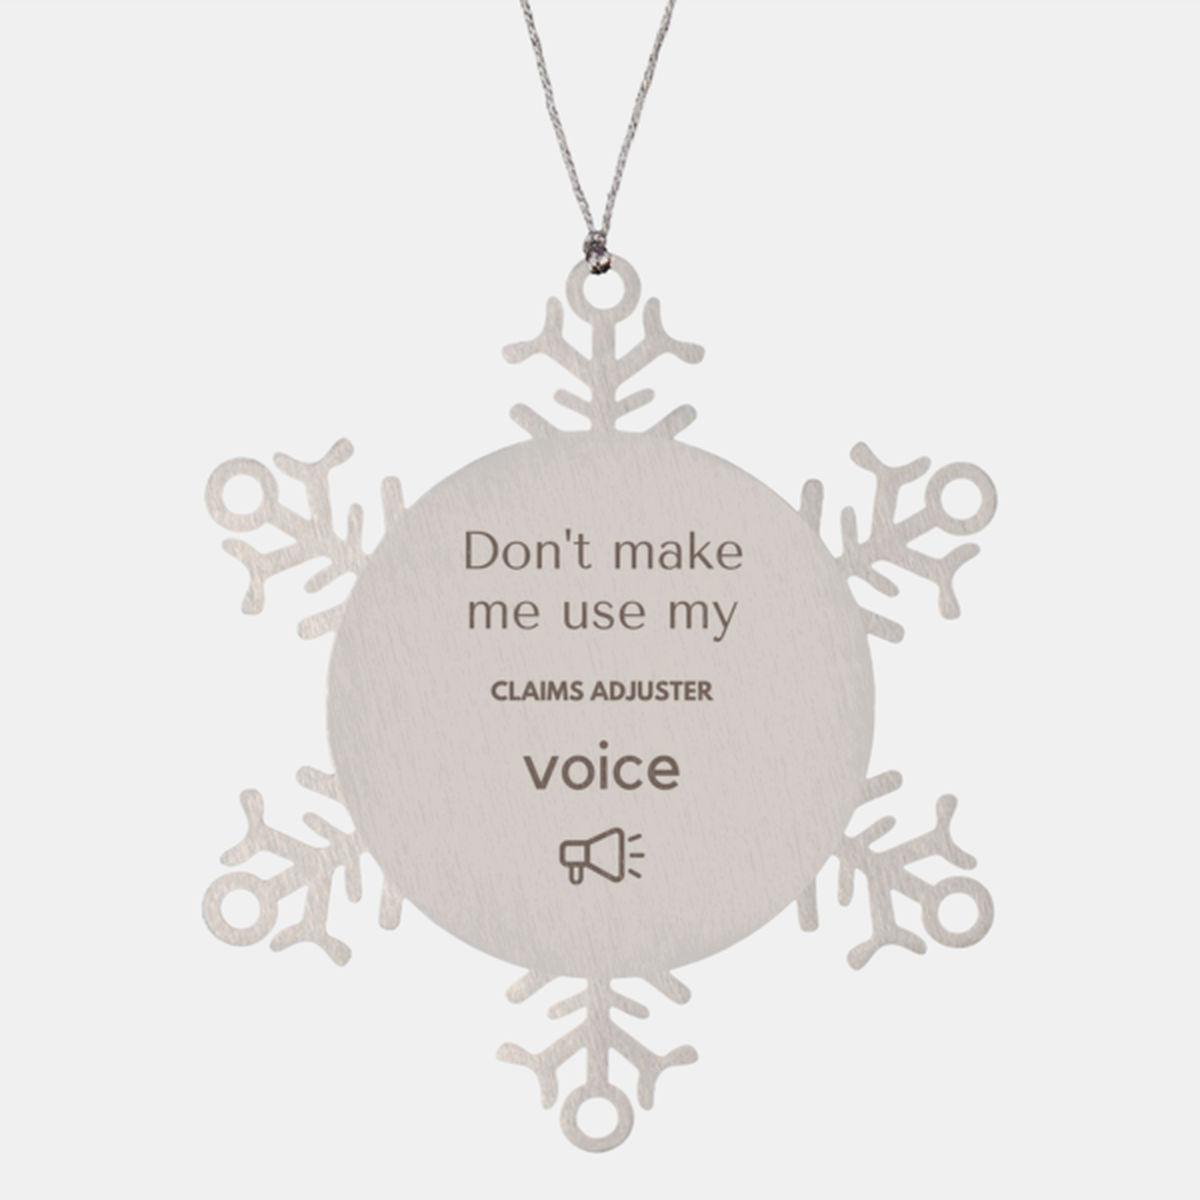 Don't make me use my Claims Adjuster voice, Sarcasm Claims Adjuster Ornament Gifts, Christmas Claims Adjuster Snowflake Ornament Unique Gifts For Claims Adjuster Coworkers, Men, Women, Colleague, Friends